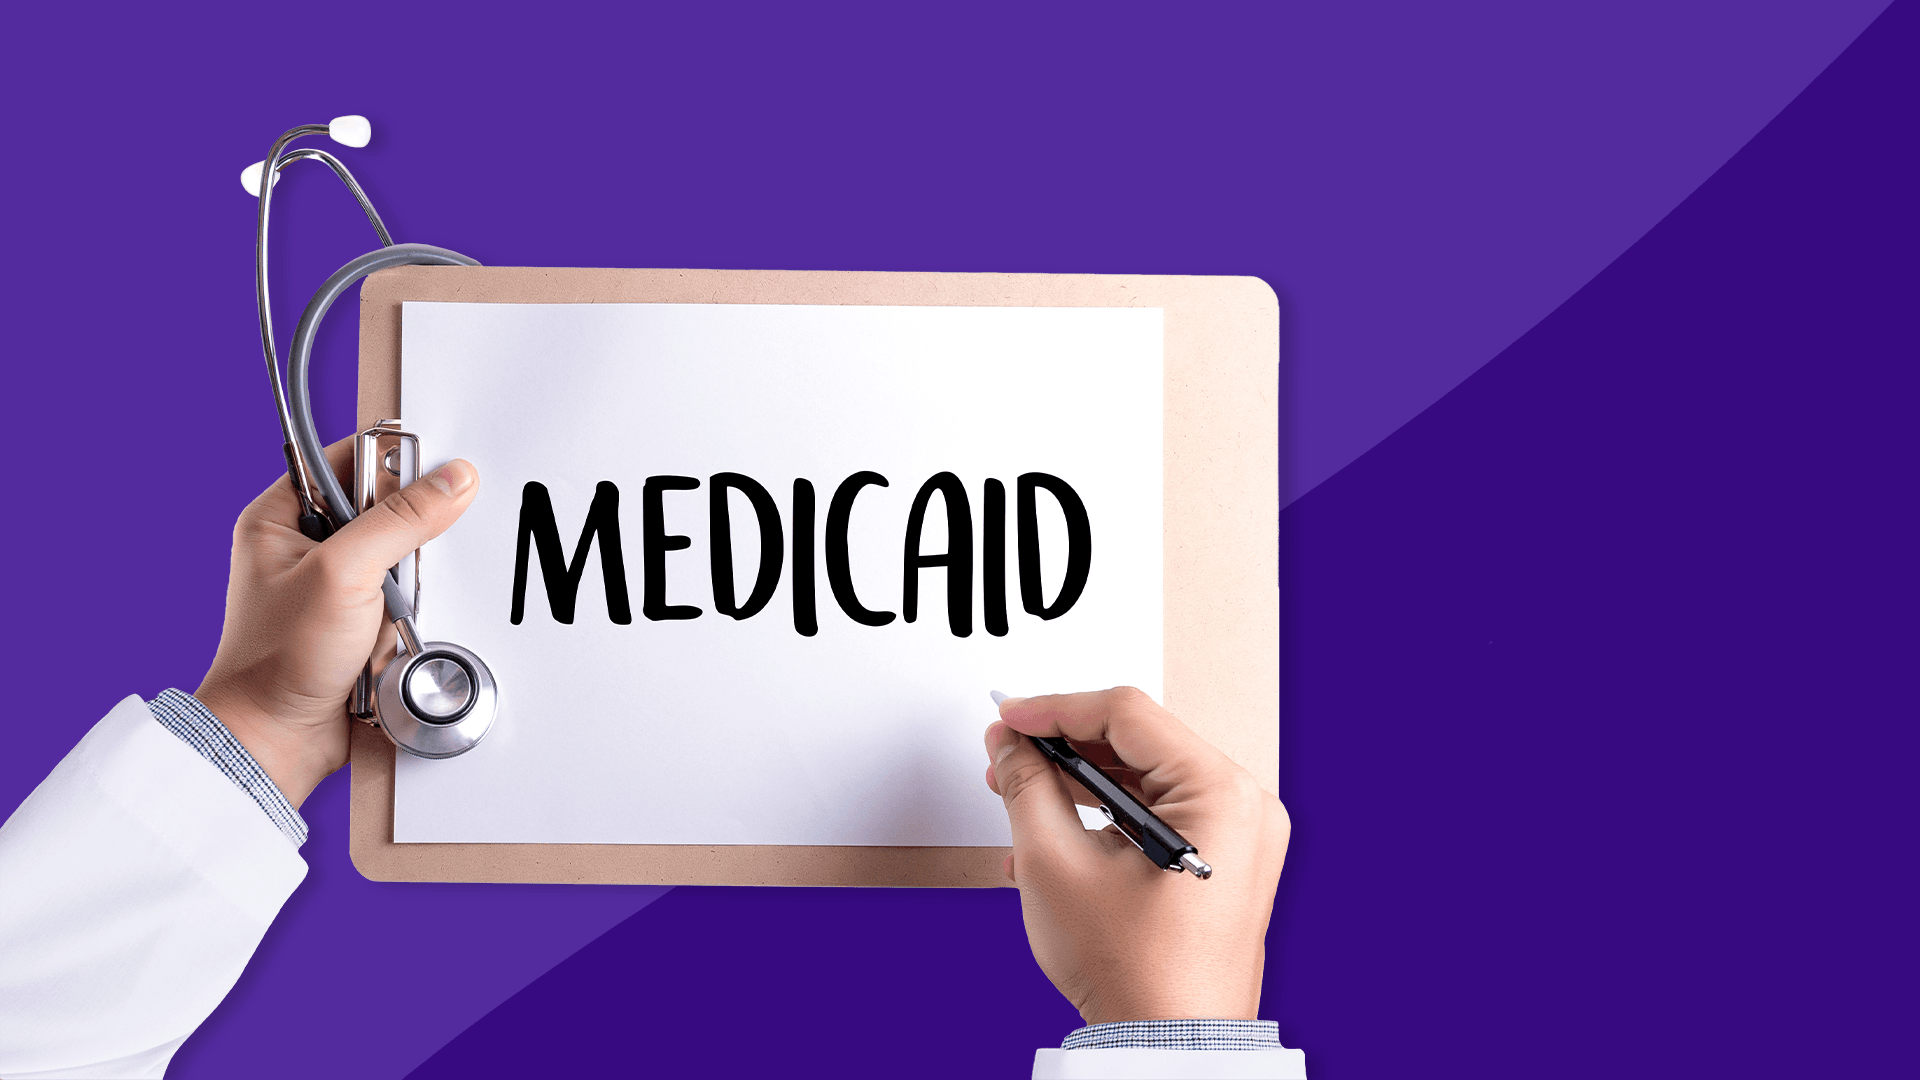 As Kelly ramps up for expanded Medicaid push, auditor finds $16 million in program waste